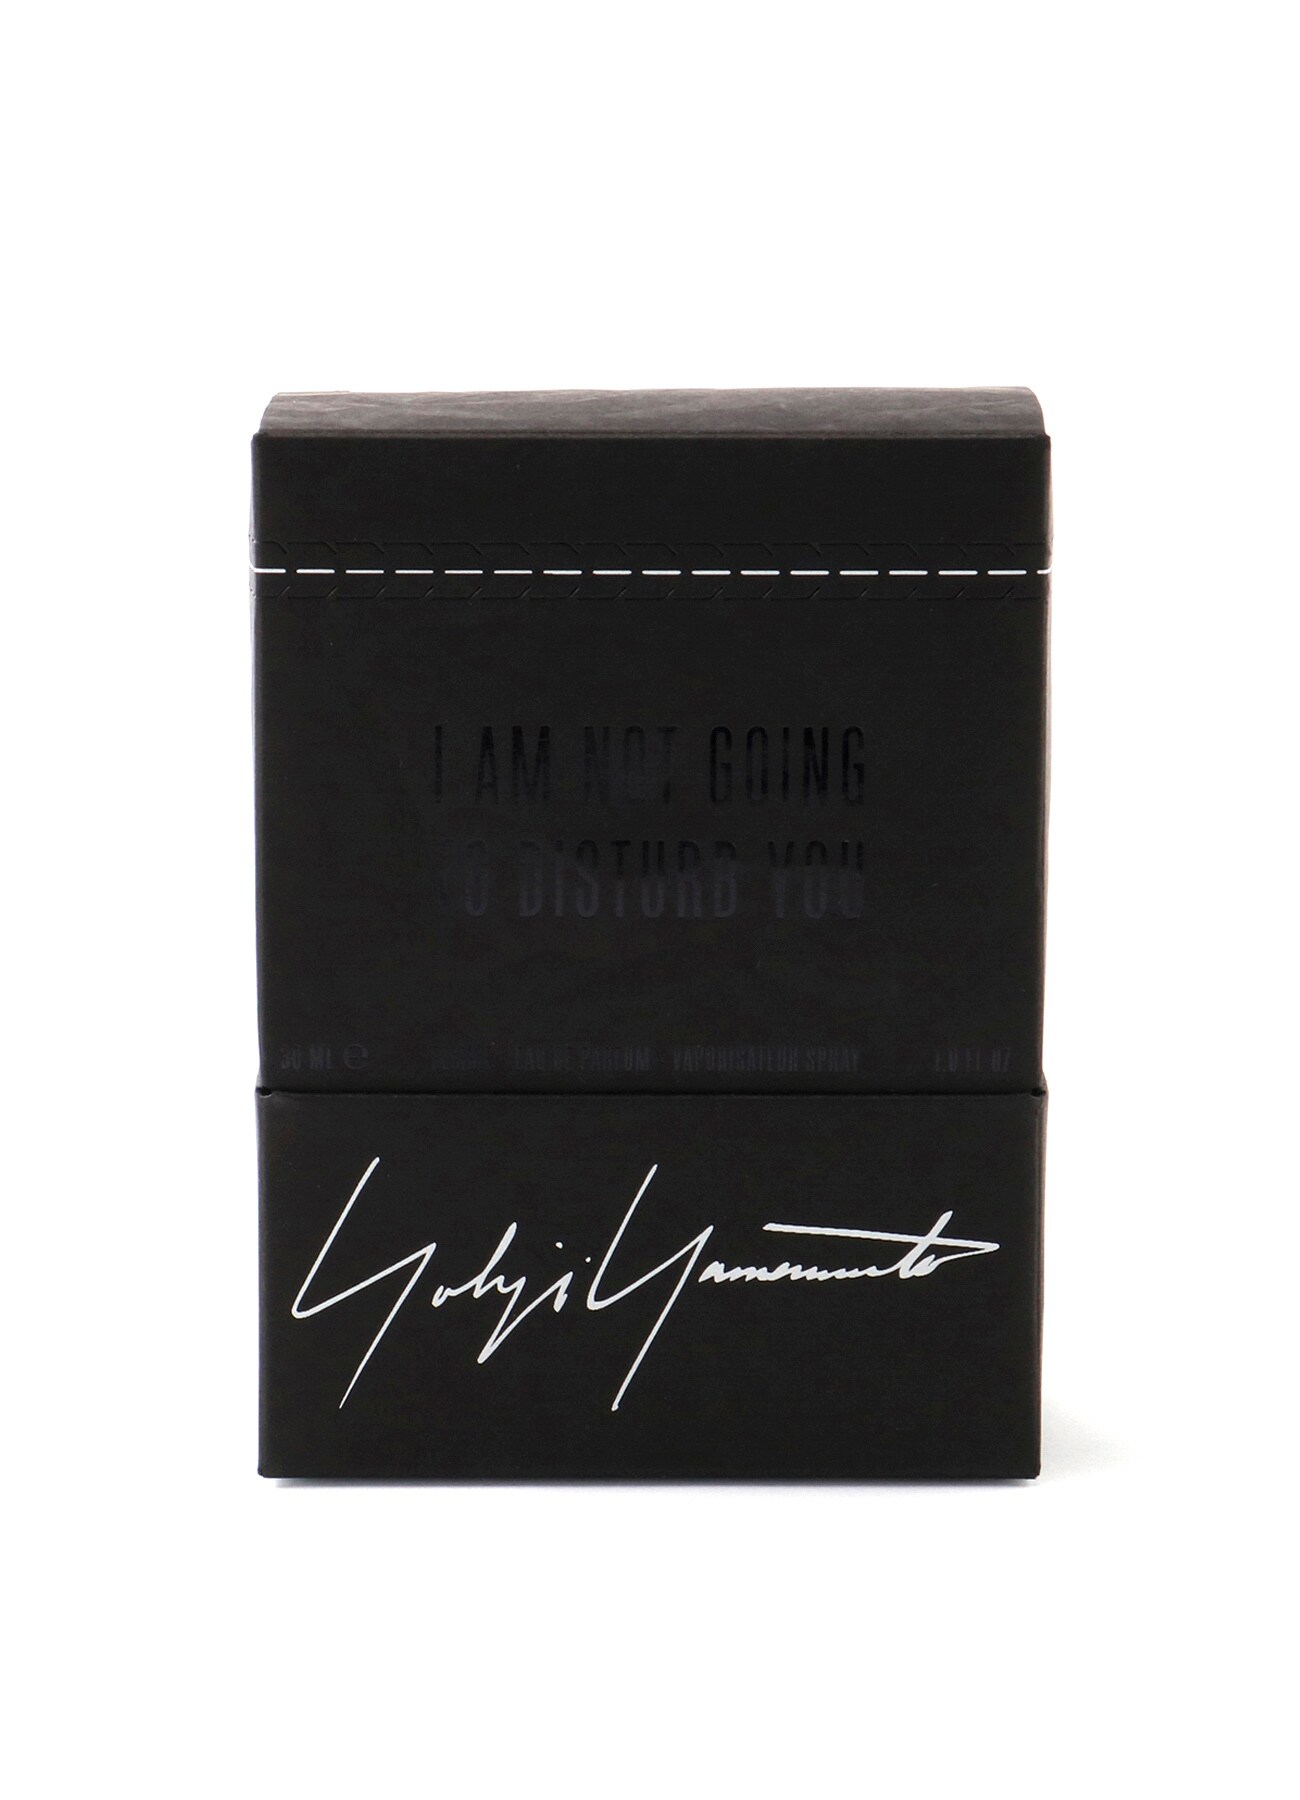 I AM NOT GOING TO DISTURB YOU FEMME 30ml